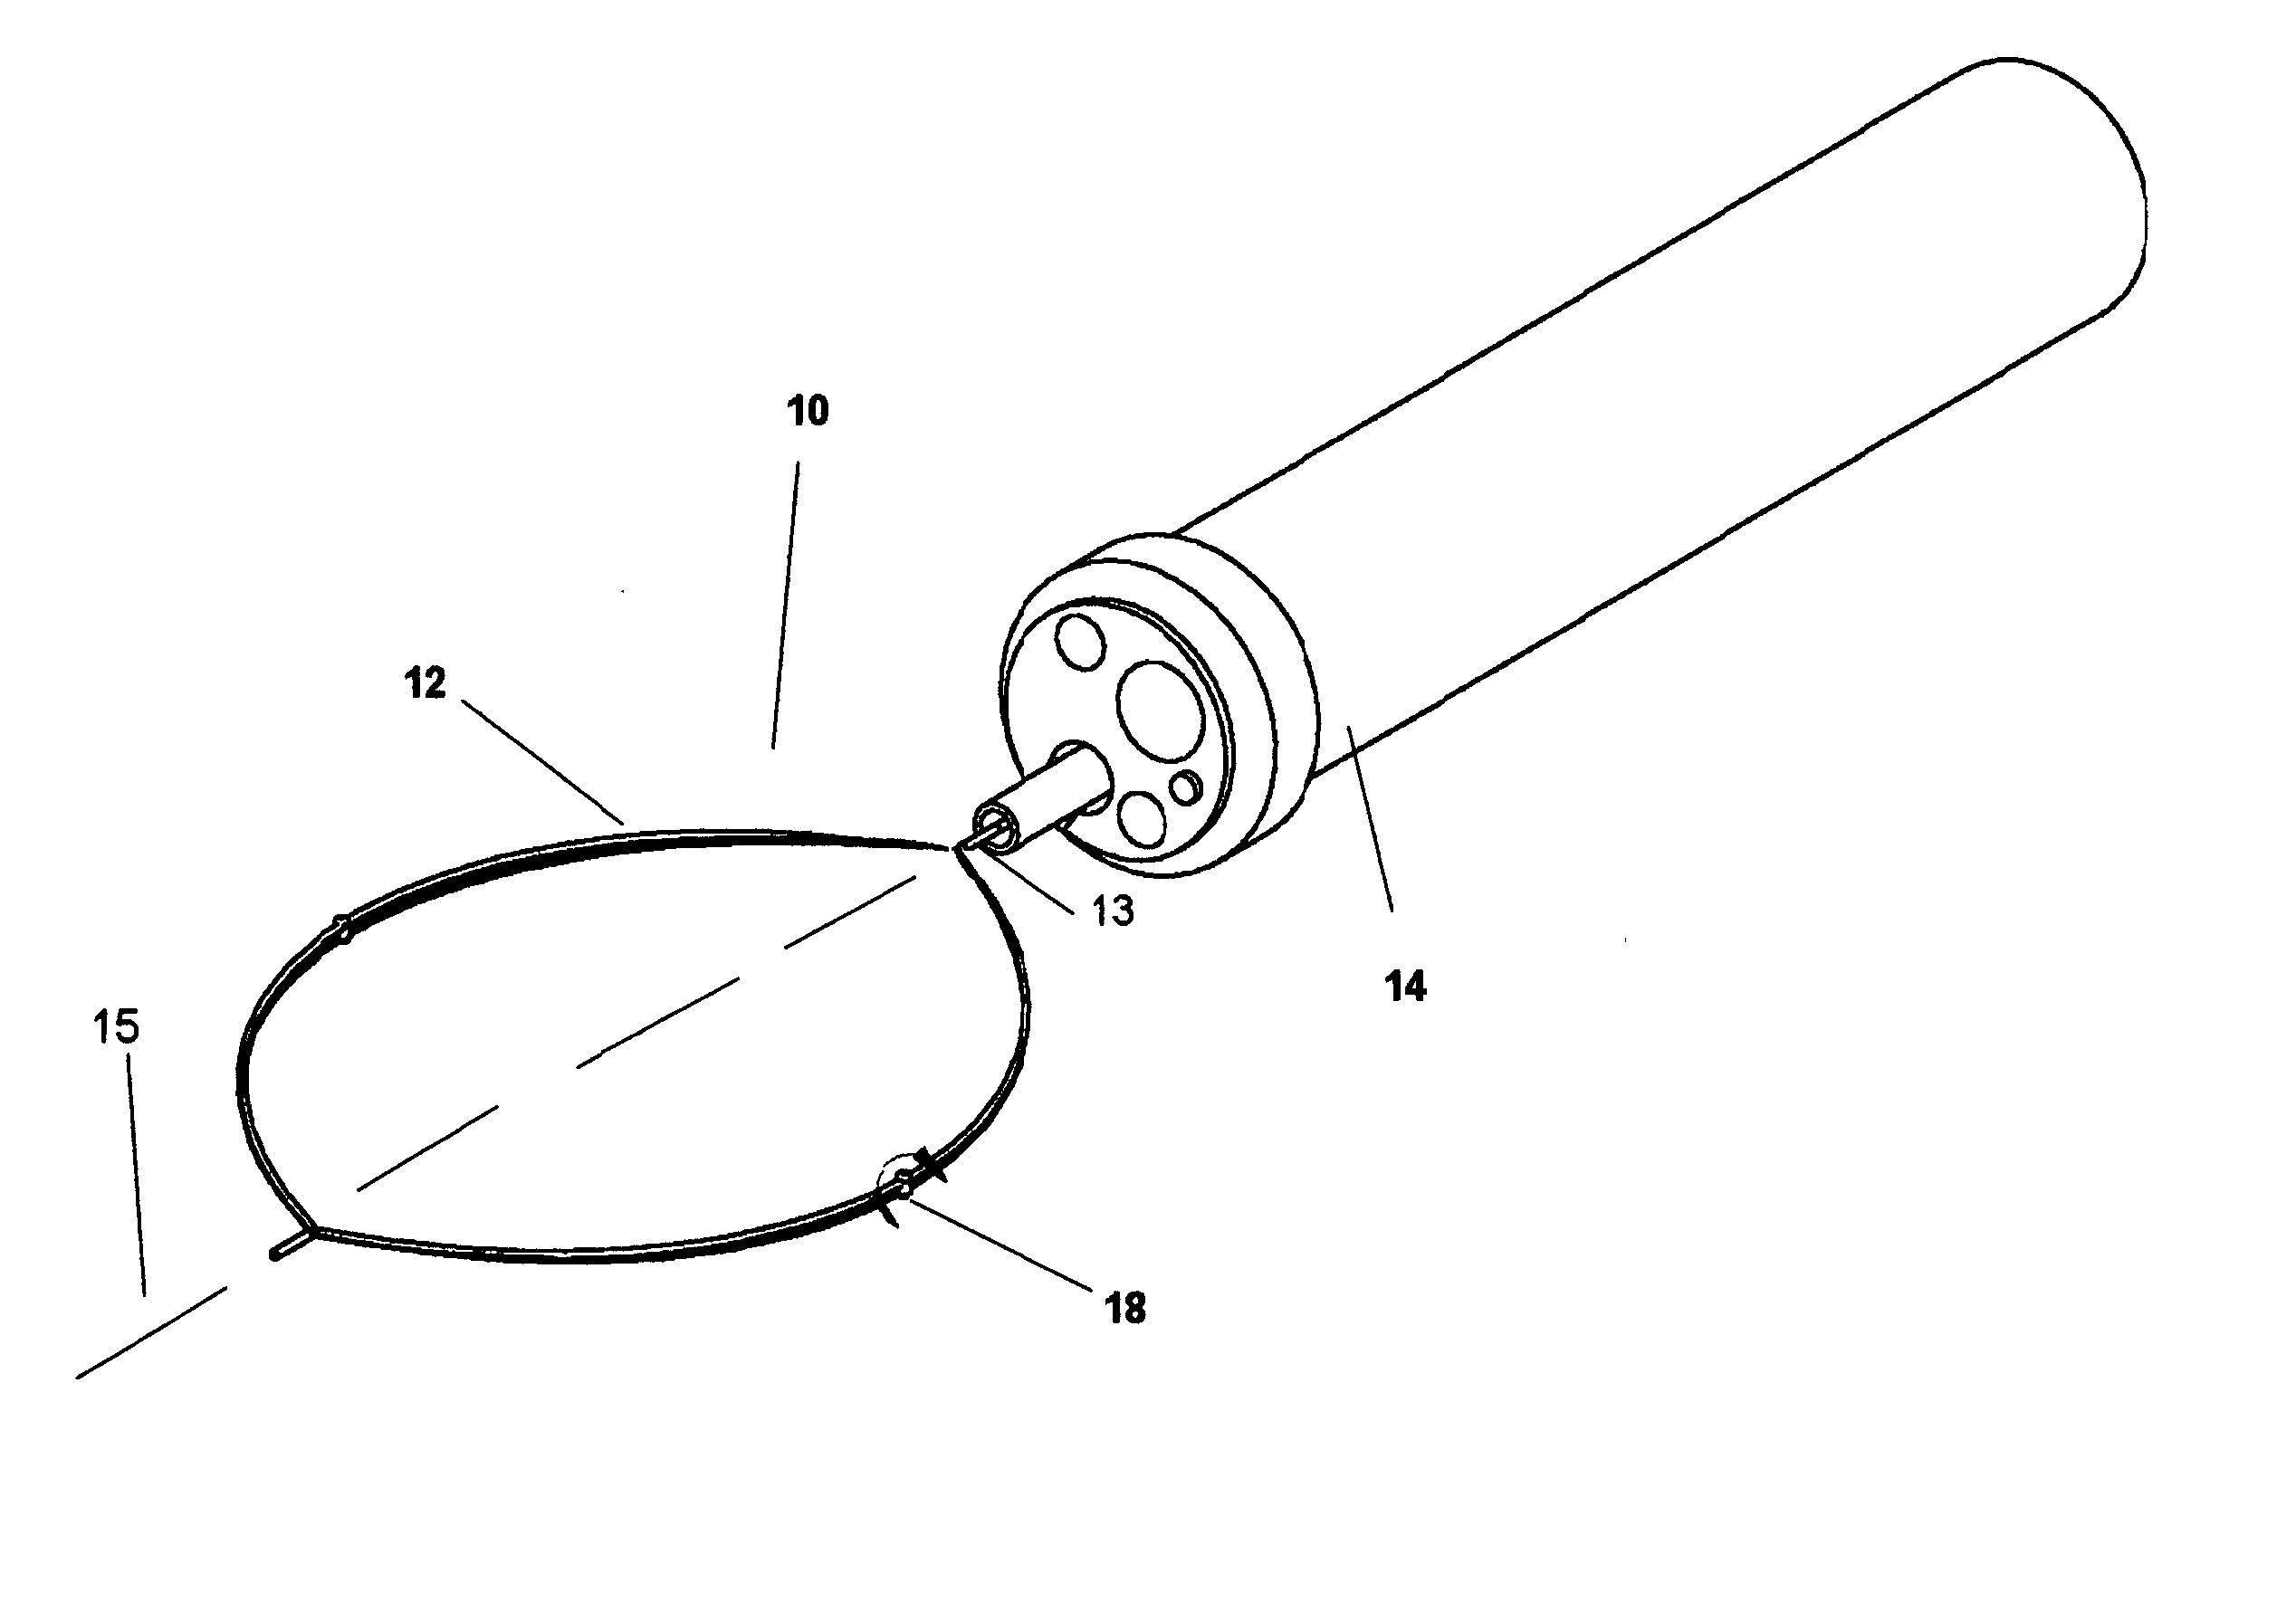 Surgical retrieval device radially deployable from collapsed position to a snare or cauterization loop